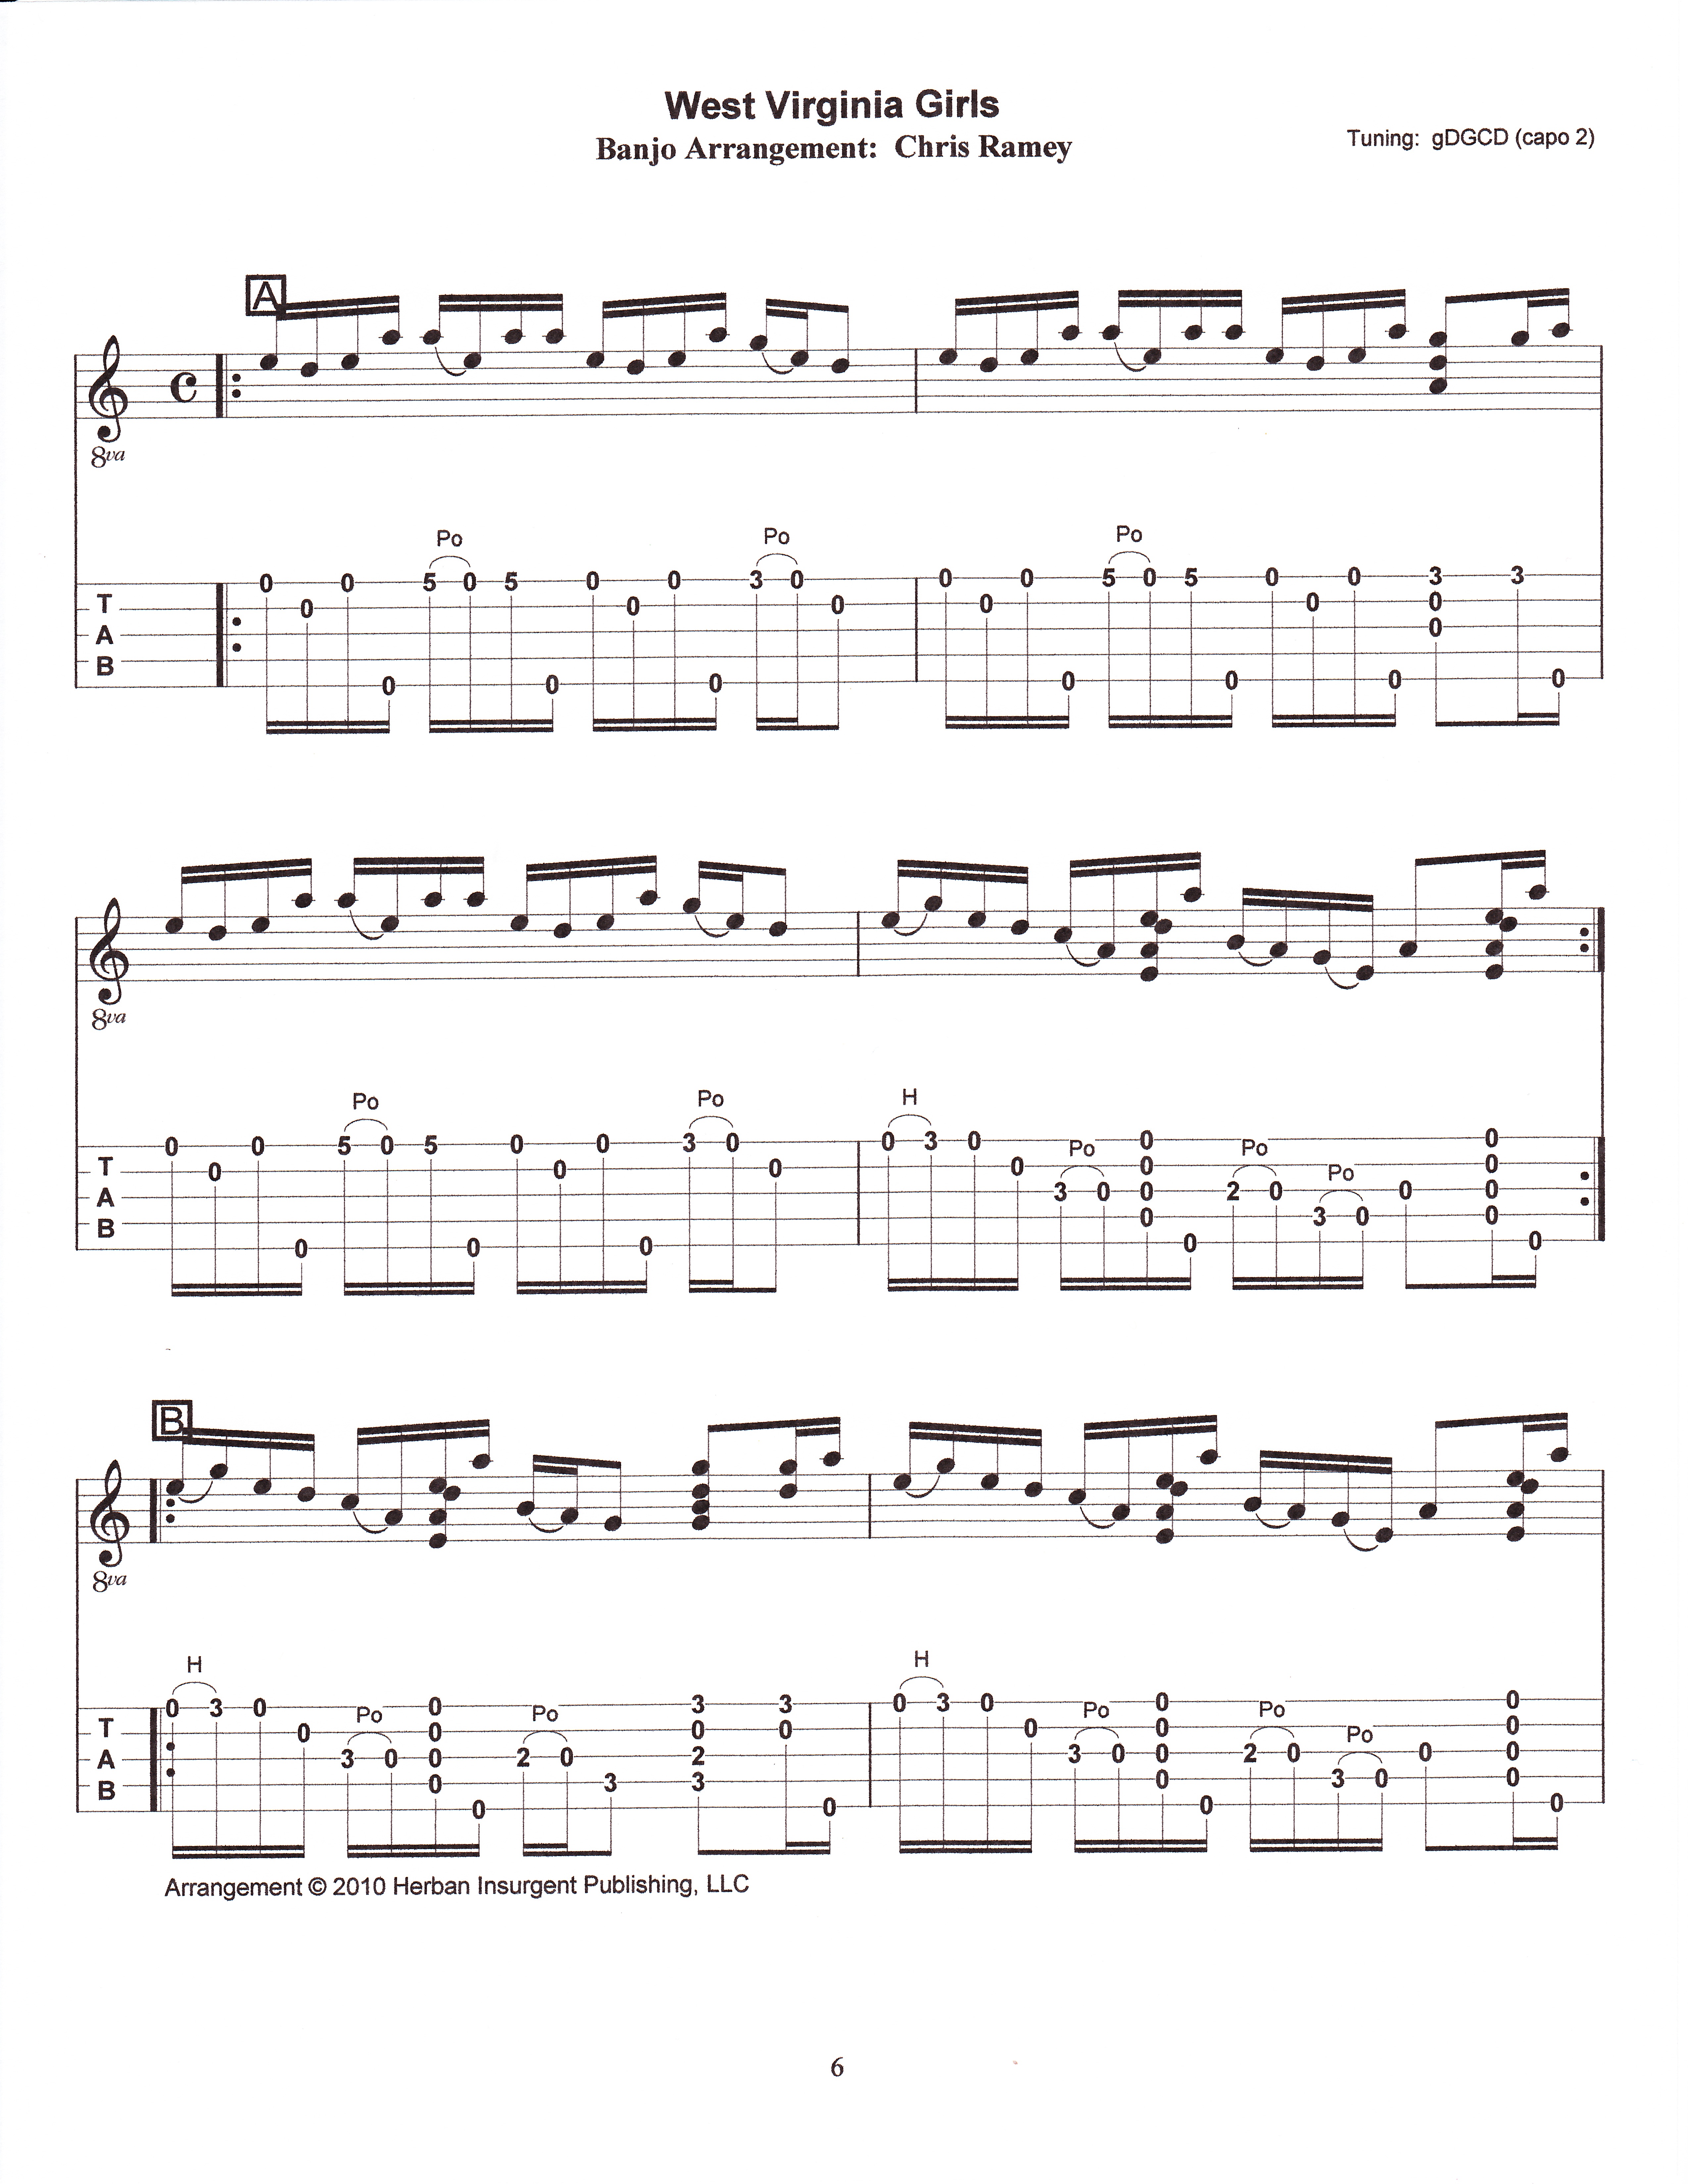 Chris Ramey - West Virginia Girls Tablature and Notation Book - Example Page